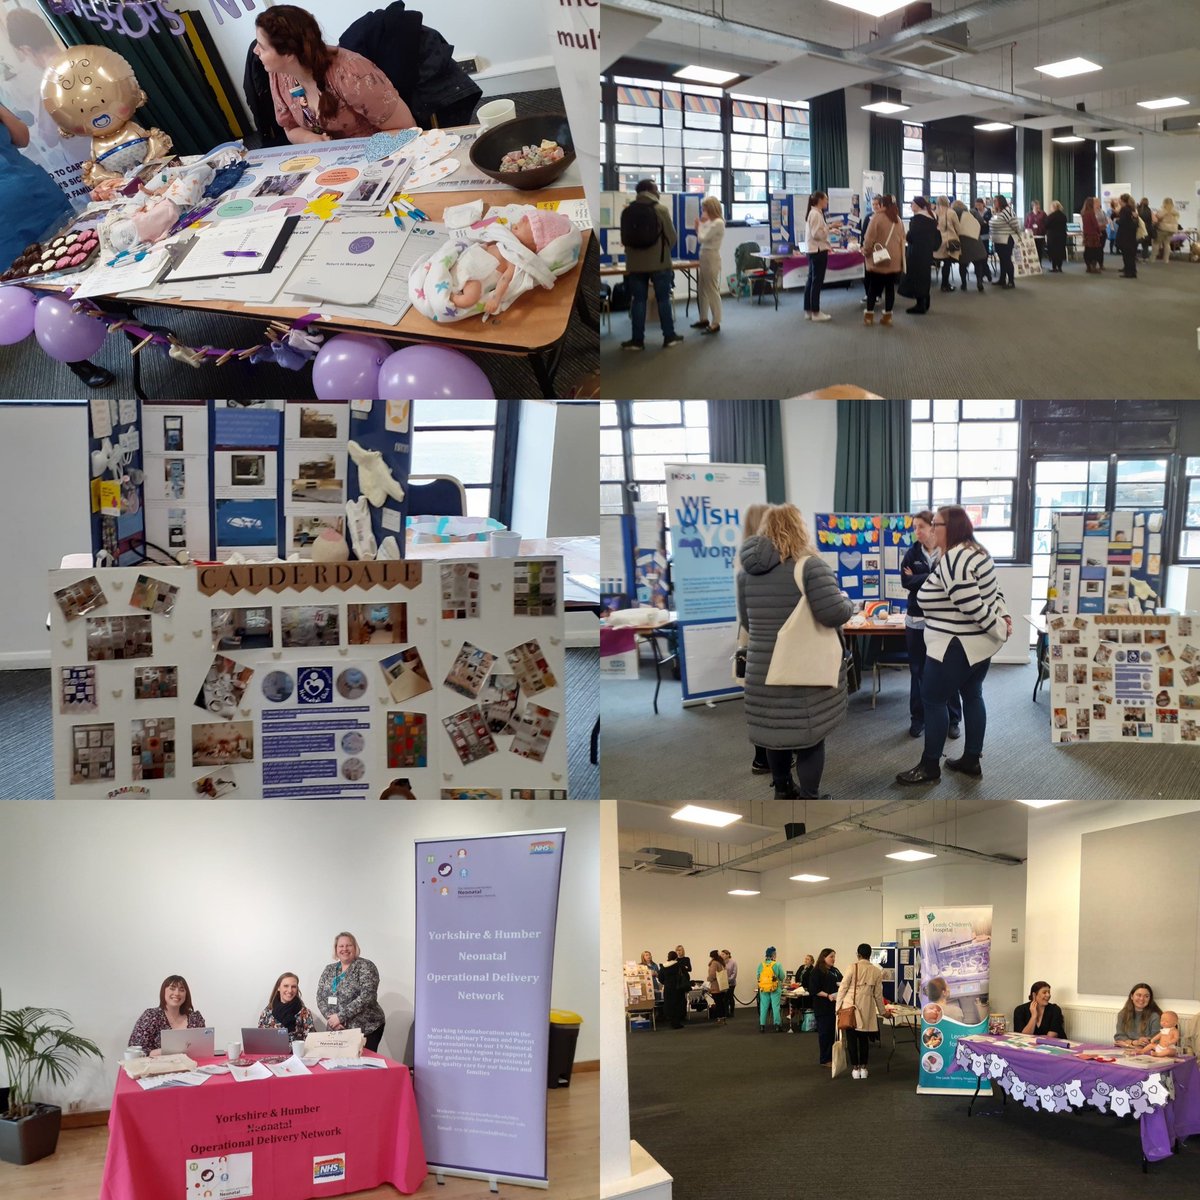 Thanks to everyone who came to our Neonatal Nursing Recruitment Fair. It was great to meet you all and good luck with your applications. Hopefully see you in our units soon! #beaNeonatalNurse #neonatalnursing #NursingJobs